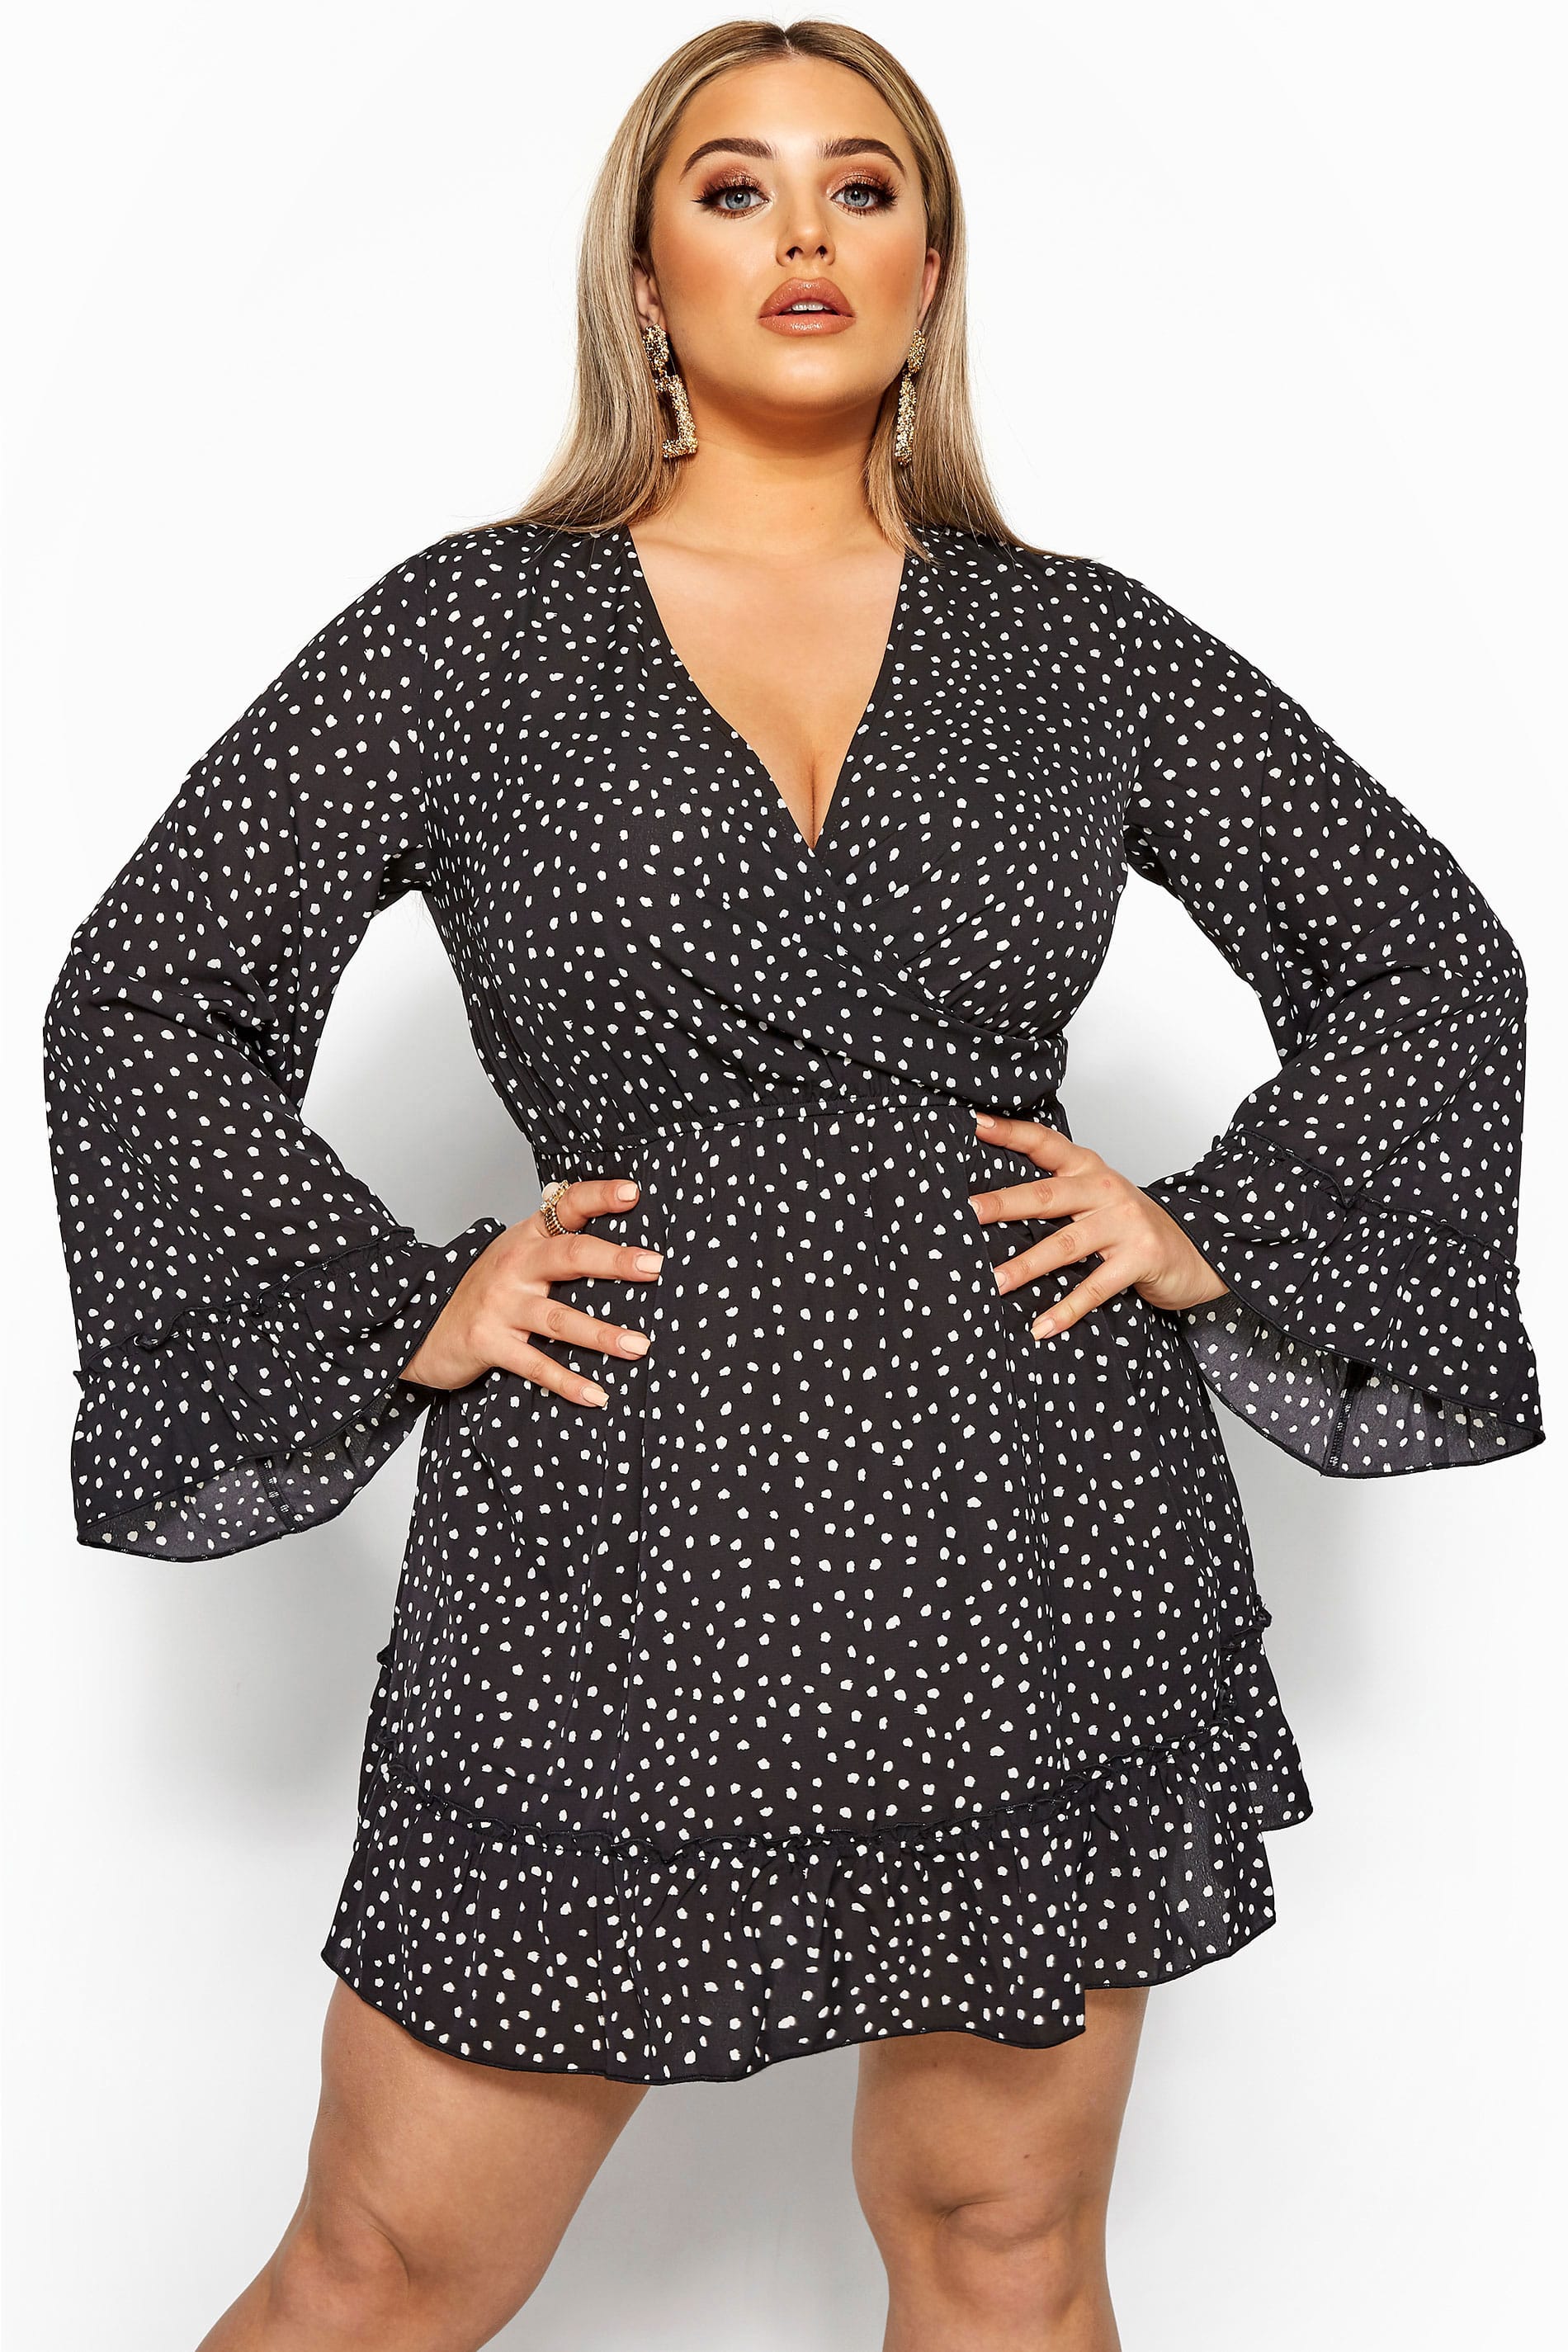 LIMITED COLLECTION Black Polka Dot Wrap Dress | Yours Clothing